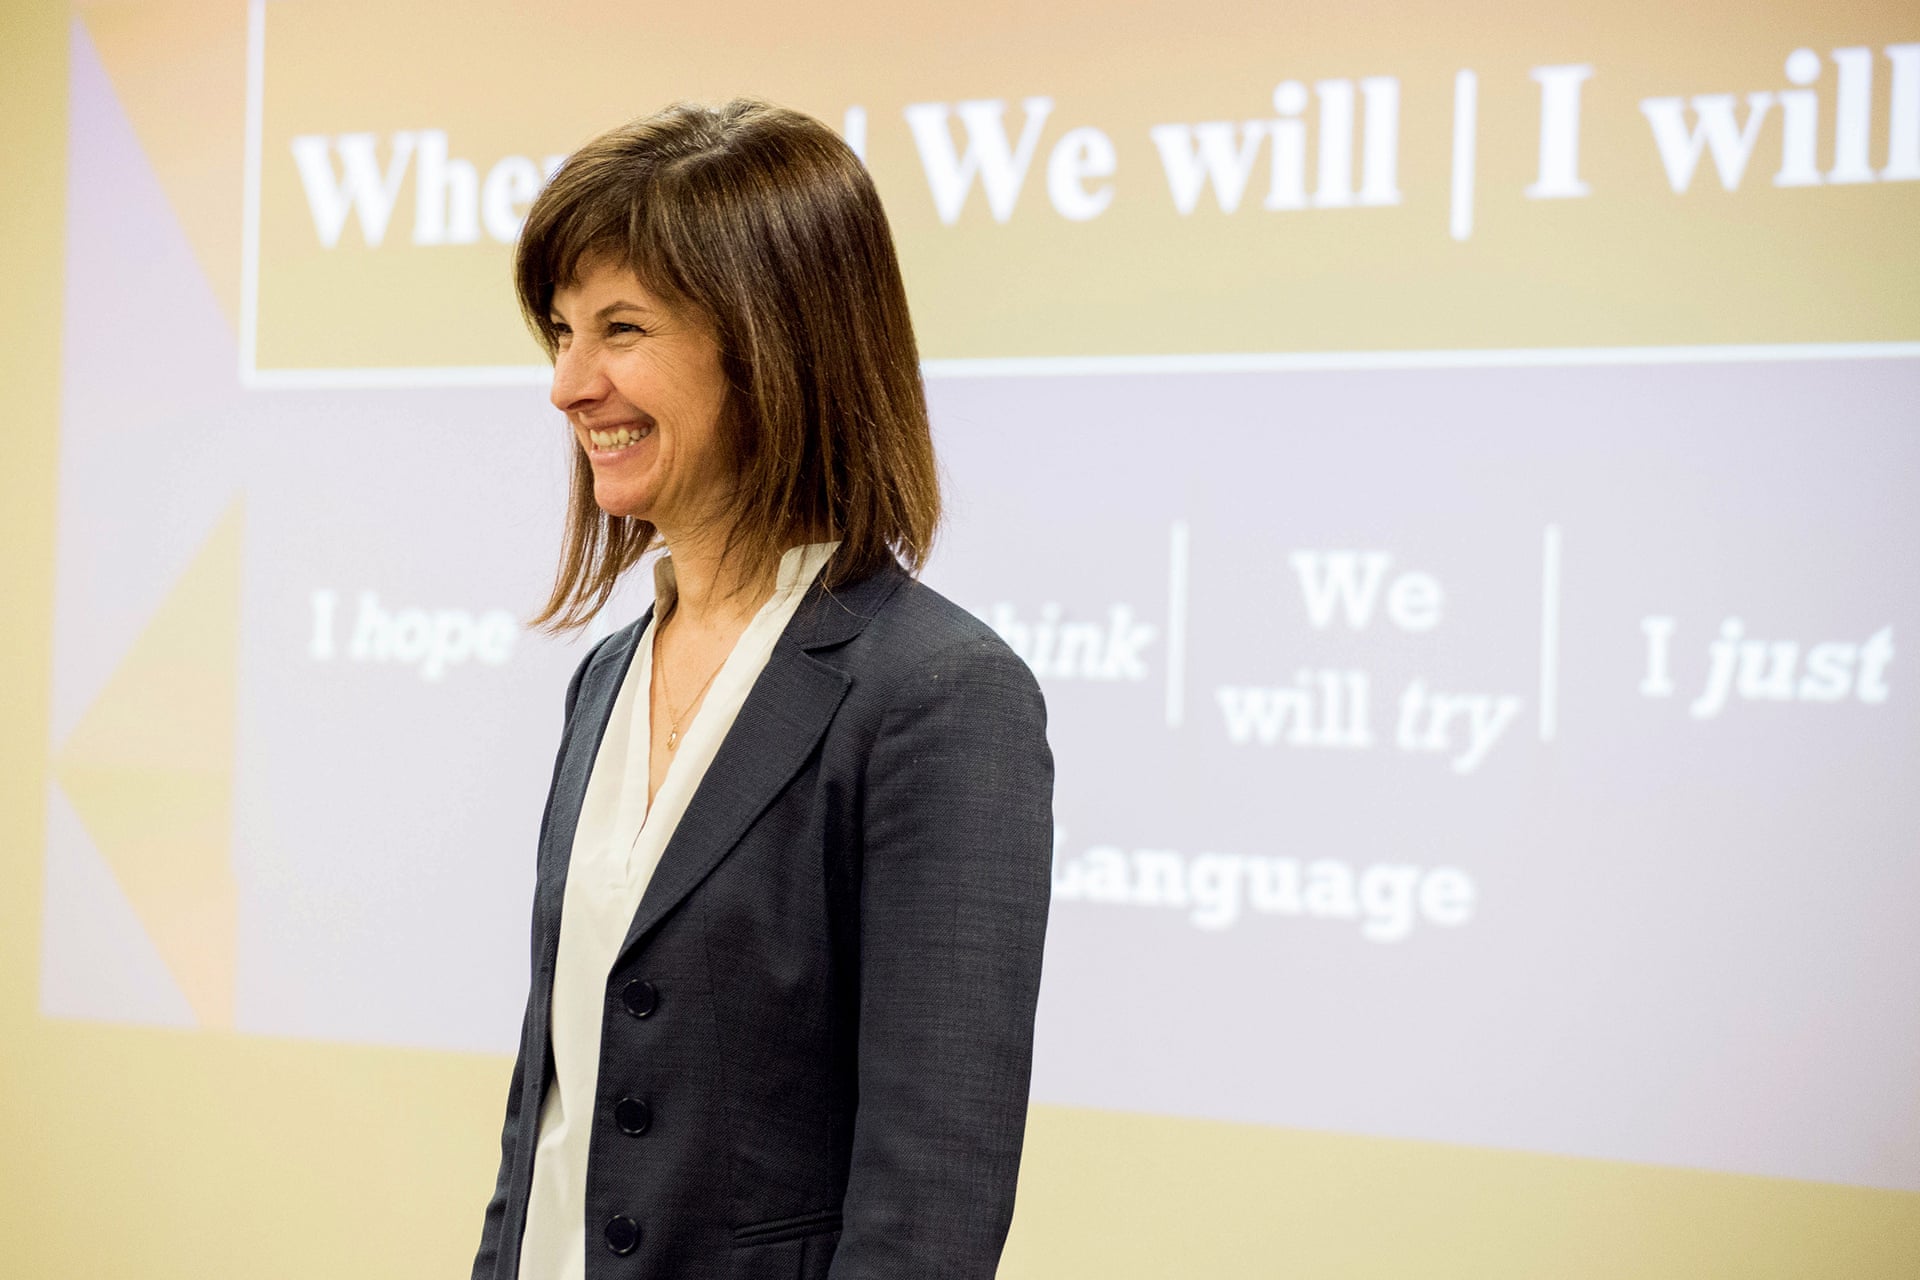 Courtney Knapp, of Articulate: Real&Clear, is a communication coach for the Emerge Virginia program. Photograph: Eslah Attar/The Guardian